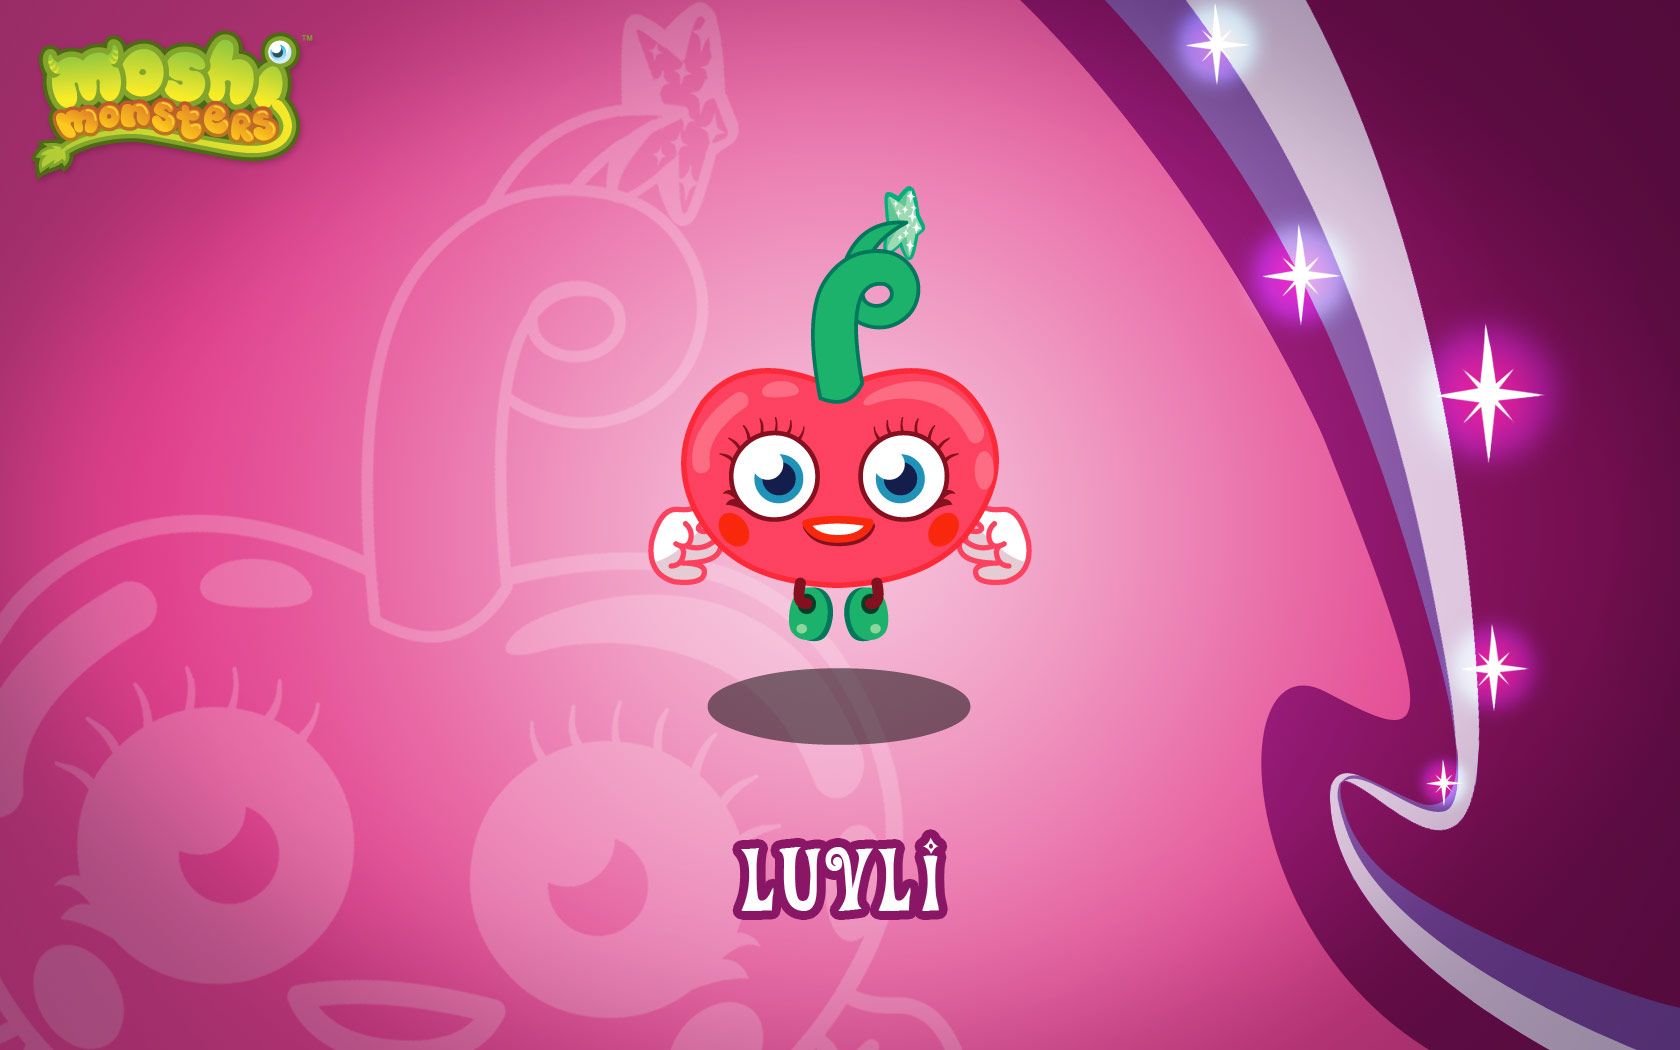 Free Moshi Monsters Desktop Wallpapers at little Monsters Games 1680x1050